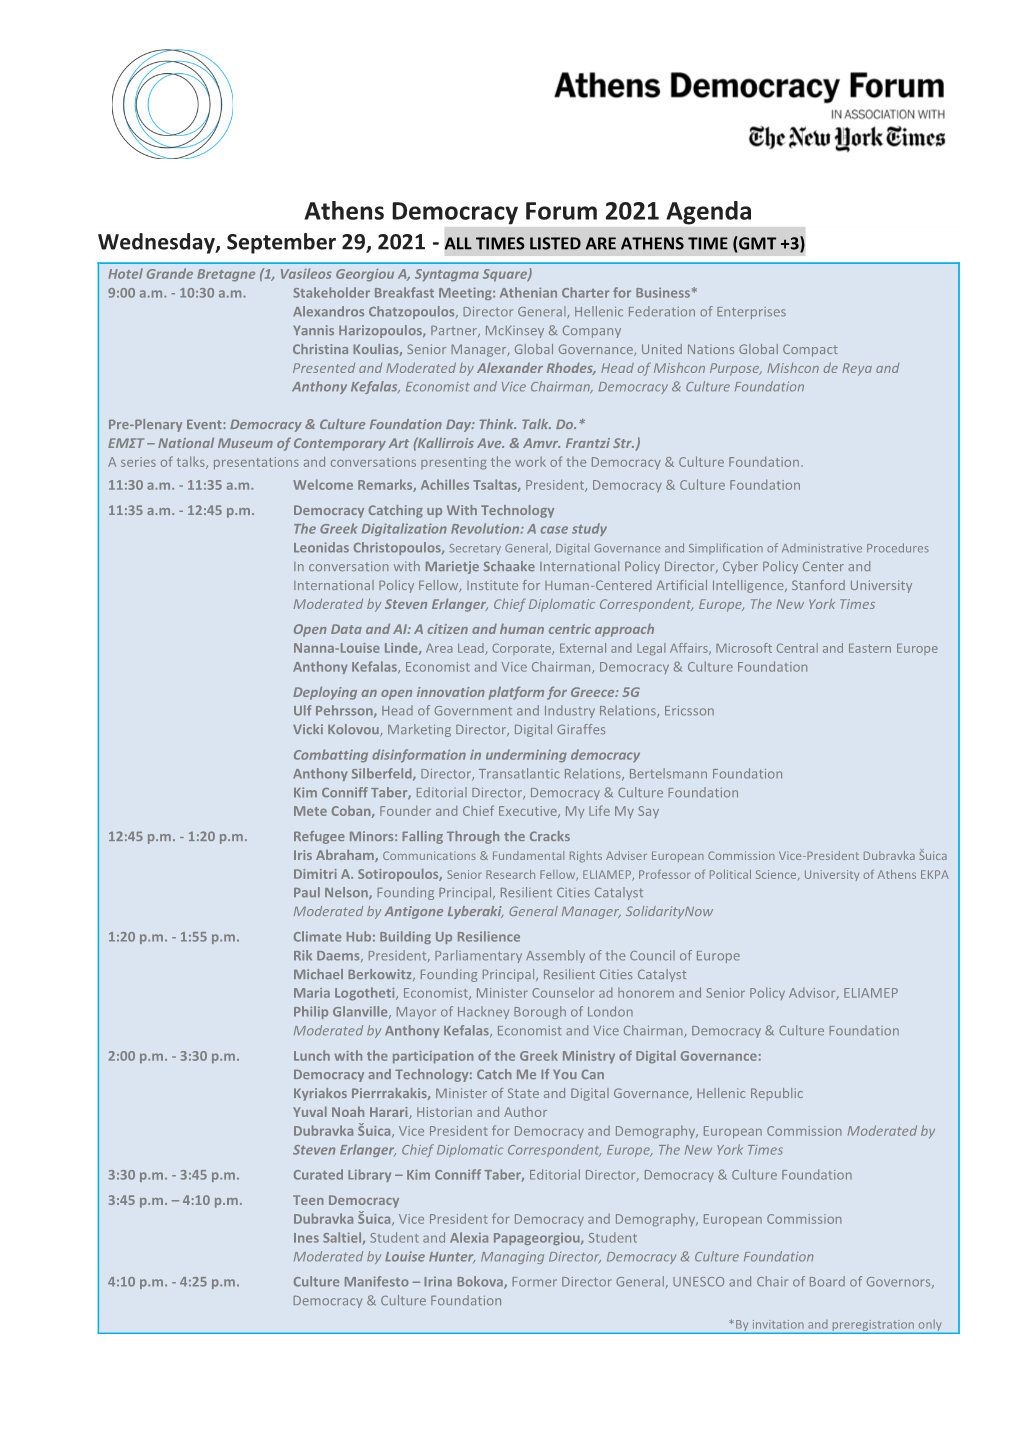 Athens Democracy Forum 2021 Agenda Wednesday, September 29, 2021 - ALL TIMES LISTED ARE ATHENS TIME (GMT +3)